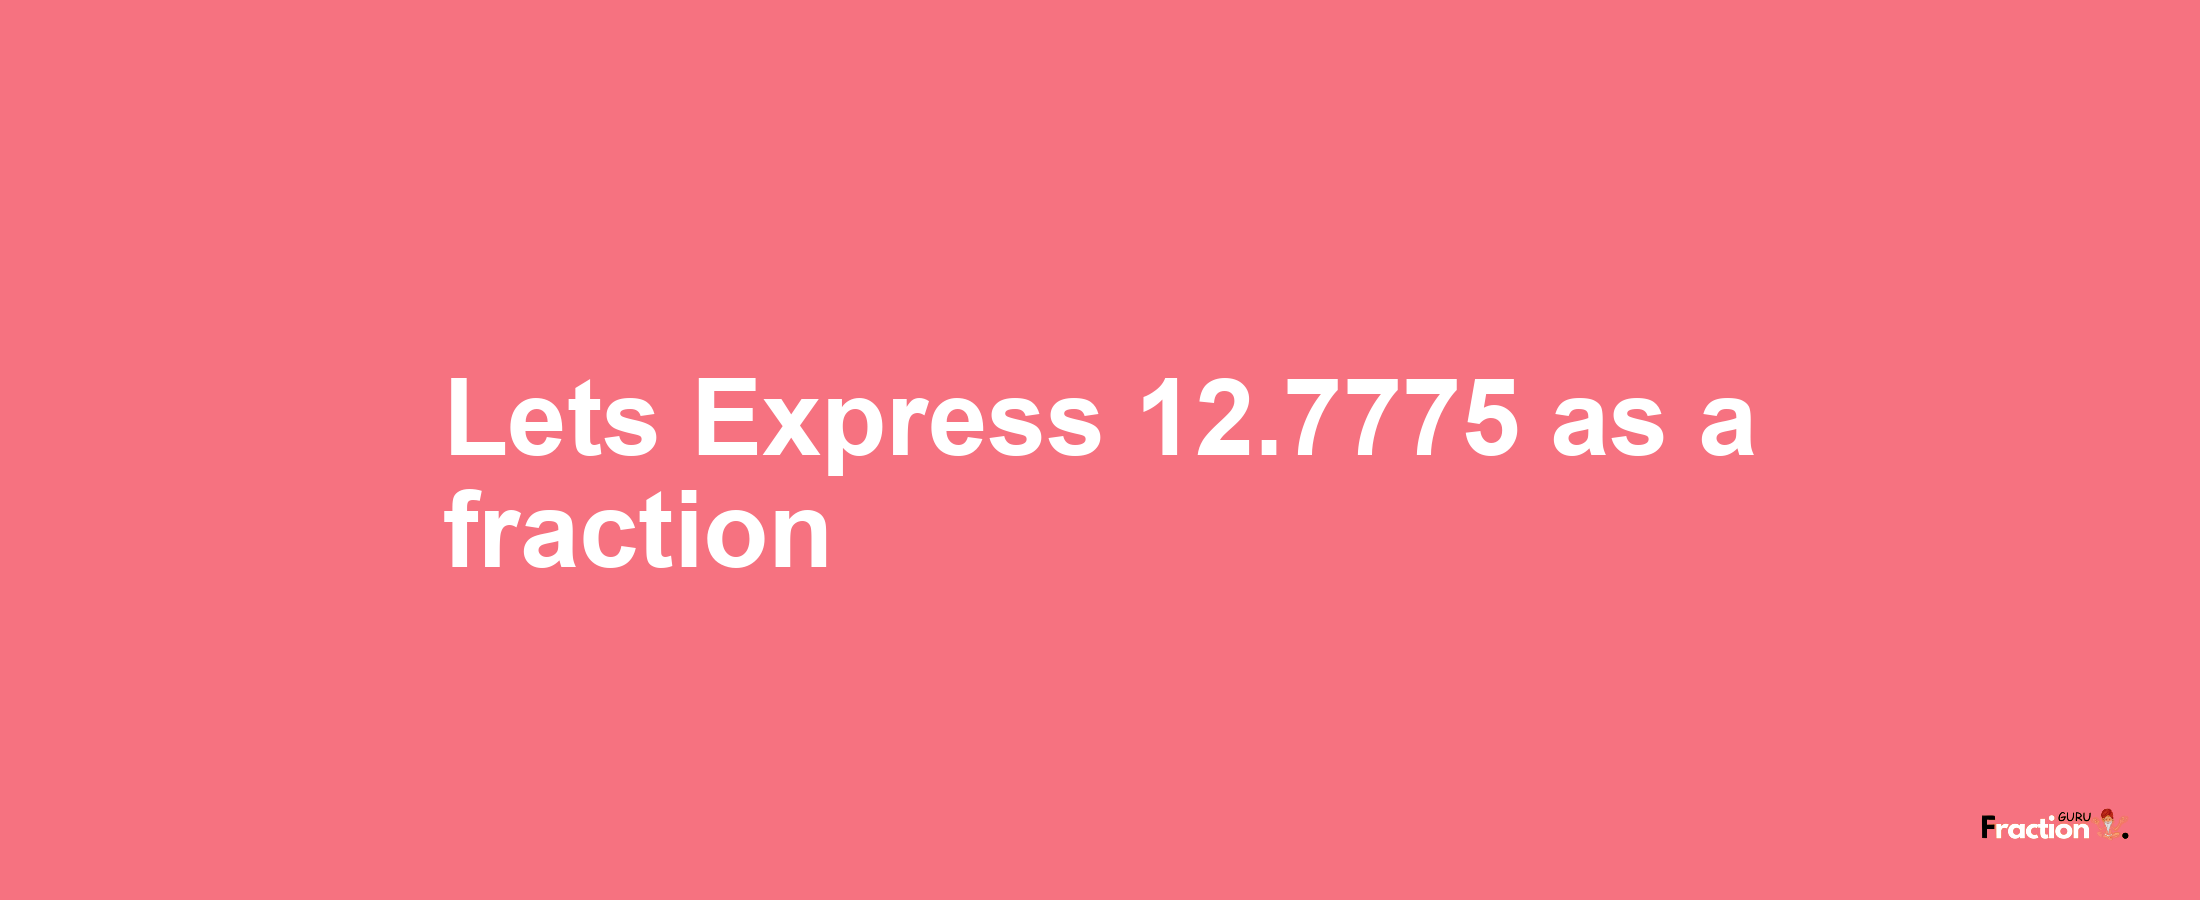 Lets Express 12.7775 as afraction